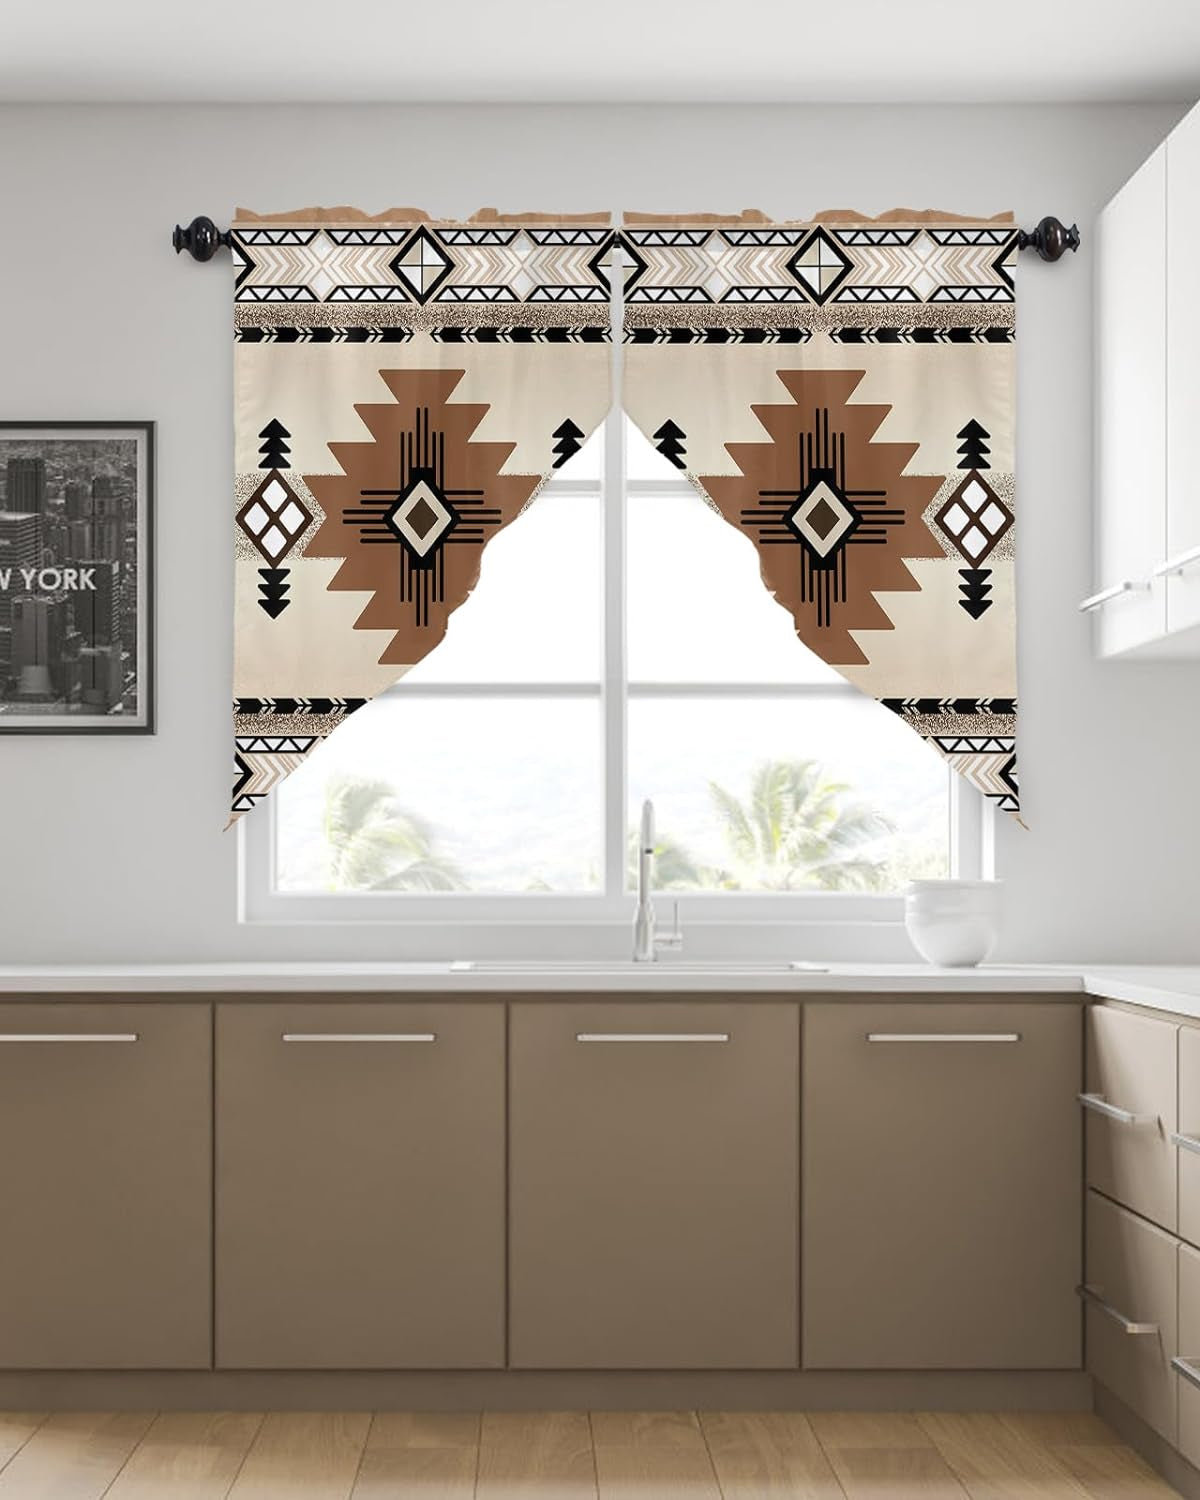 Boho Western Swag Curtains for Living Room/Kitchen/Bedroom/Bathroom, Southwest Native American Indian Geometric Swag Valance Curtains Short Half Kitchen Topper Curtains Window Swag 2 Panels 36''X63''